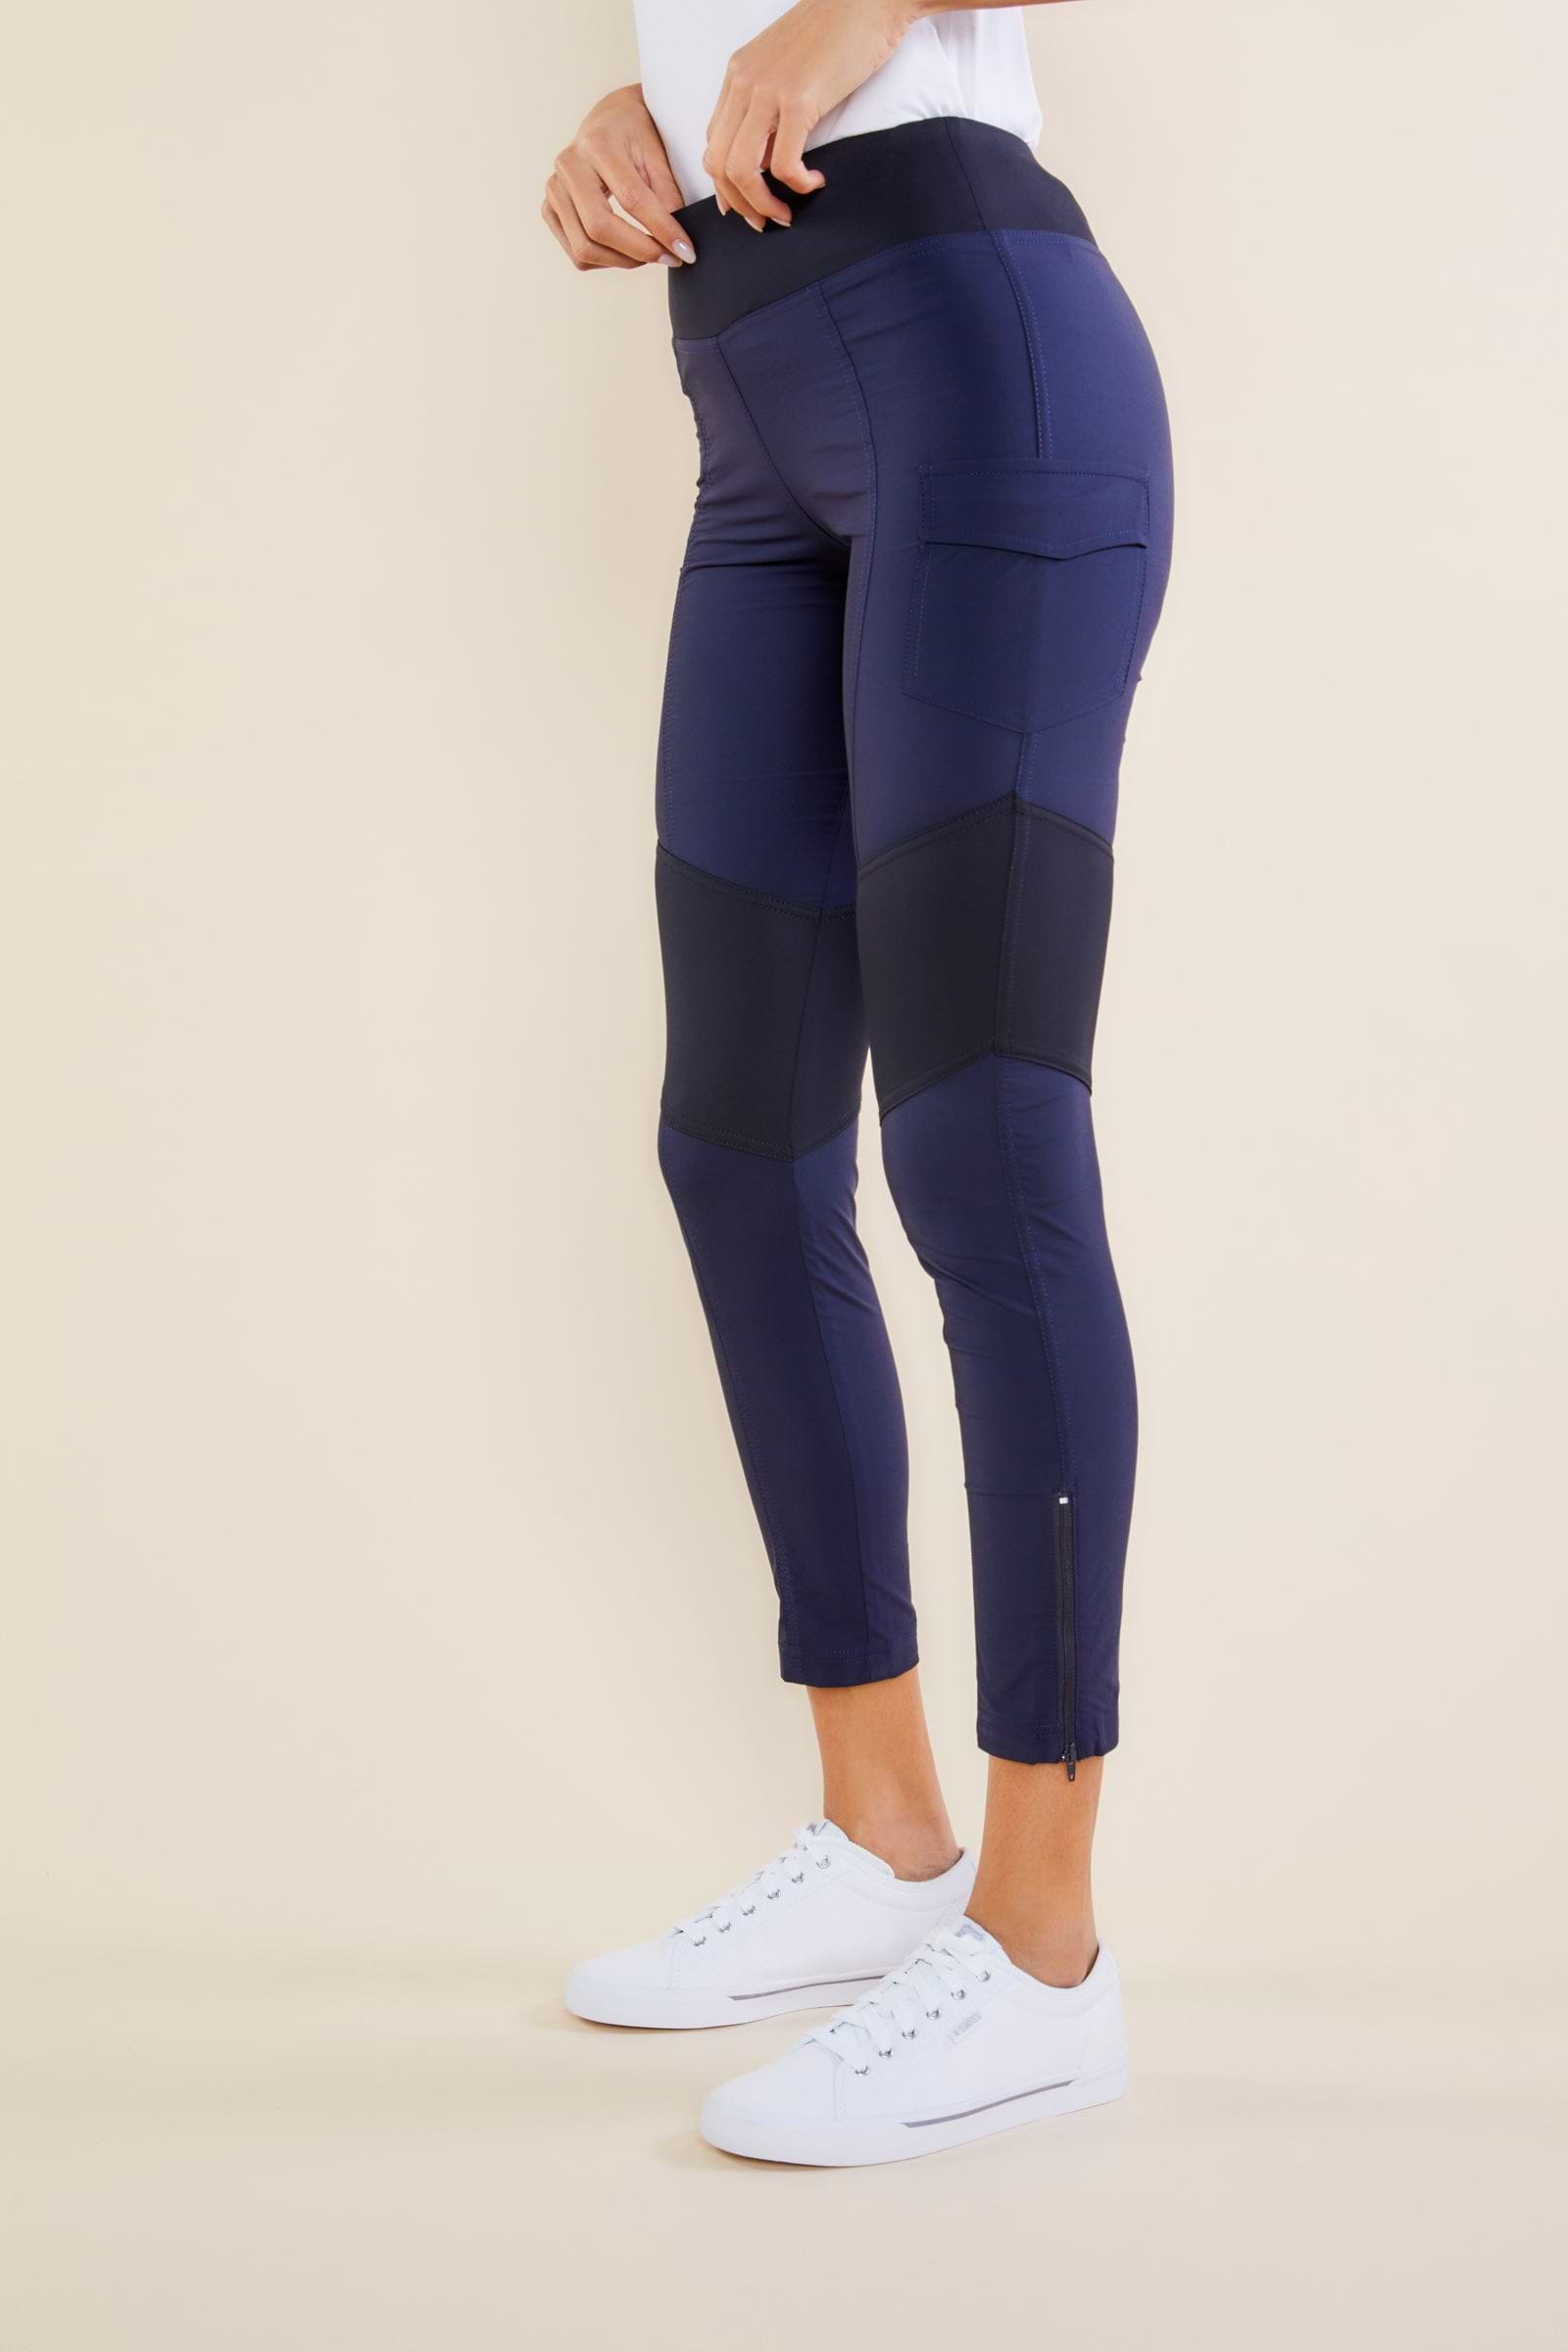 The Best Travel Pants. Side Profile of the Andrea Contrast-Panel Legging in Navy with Black